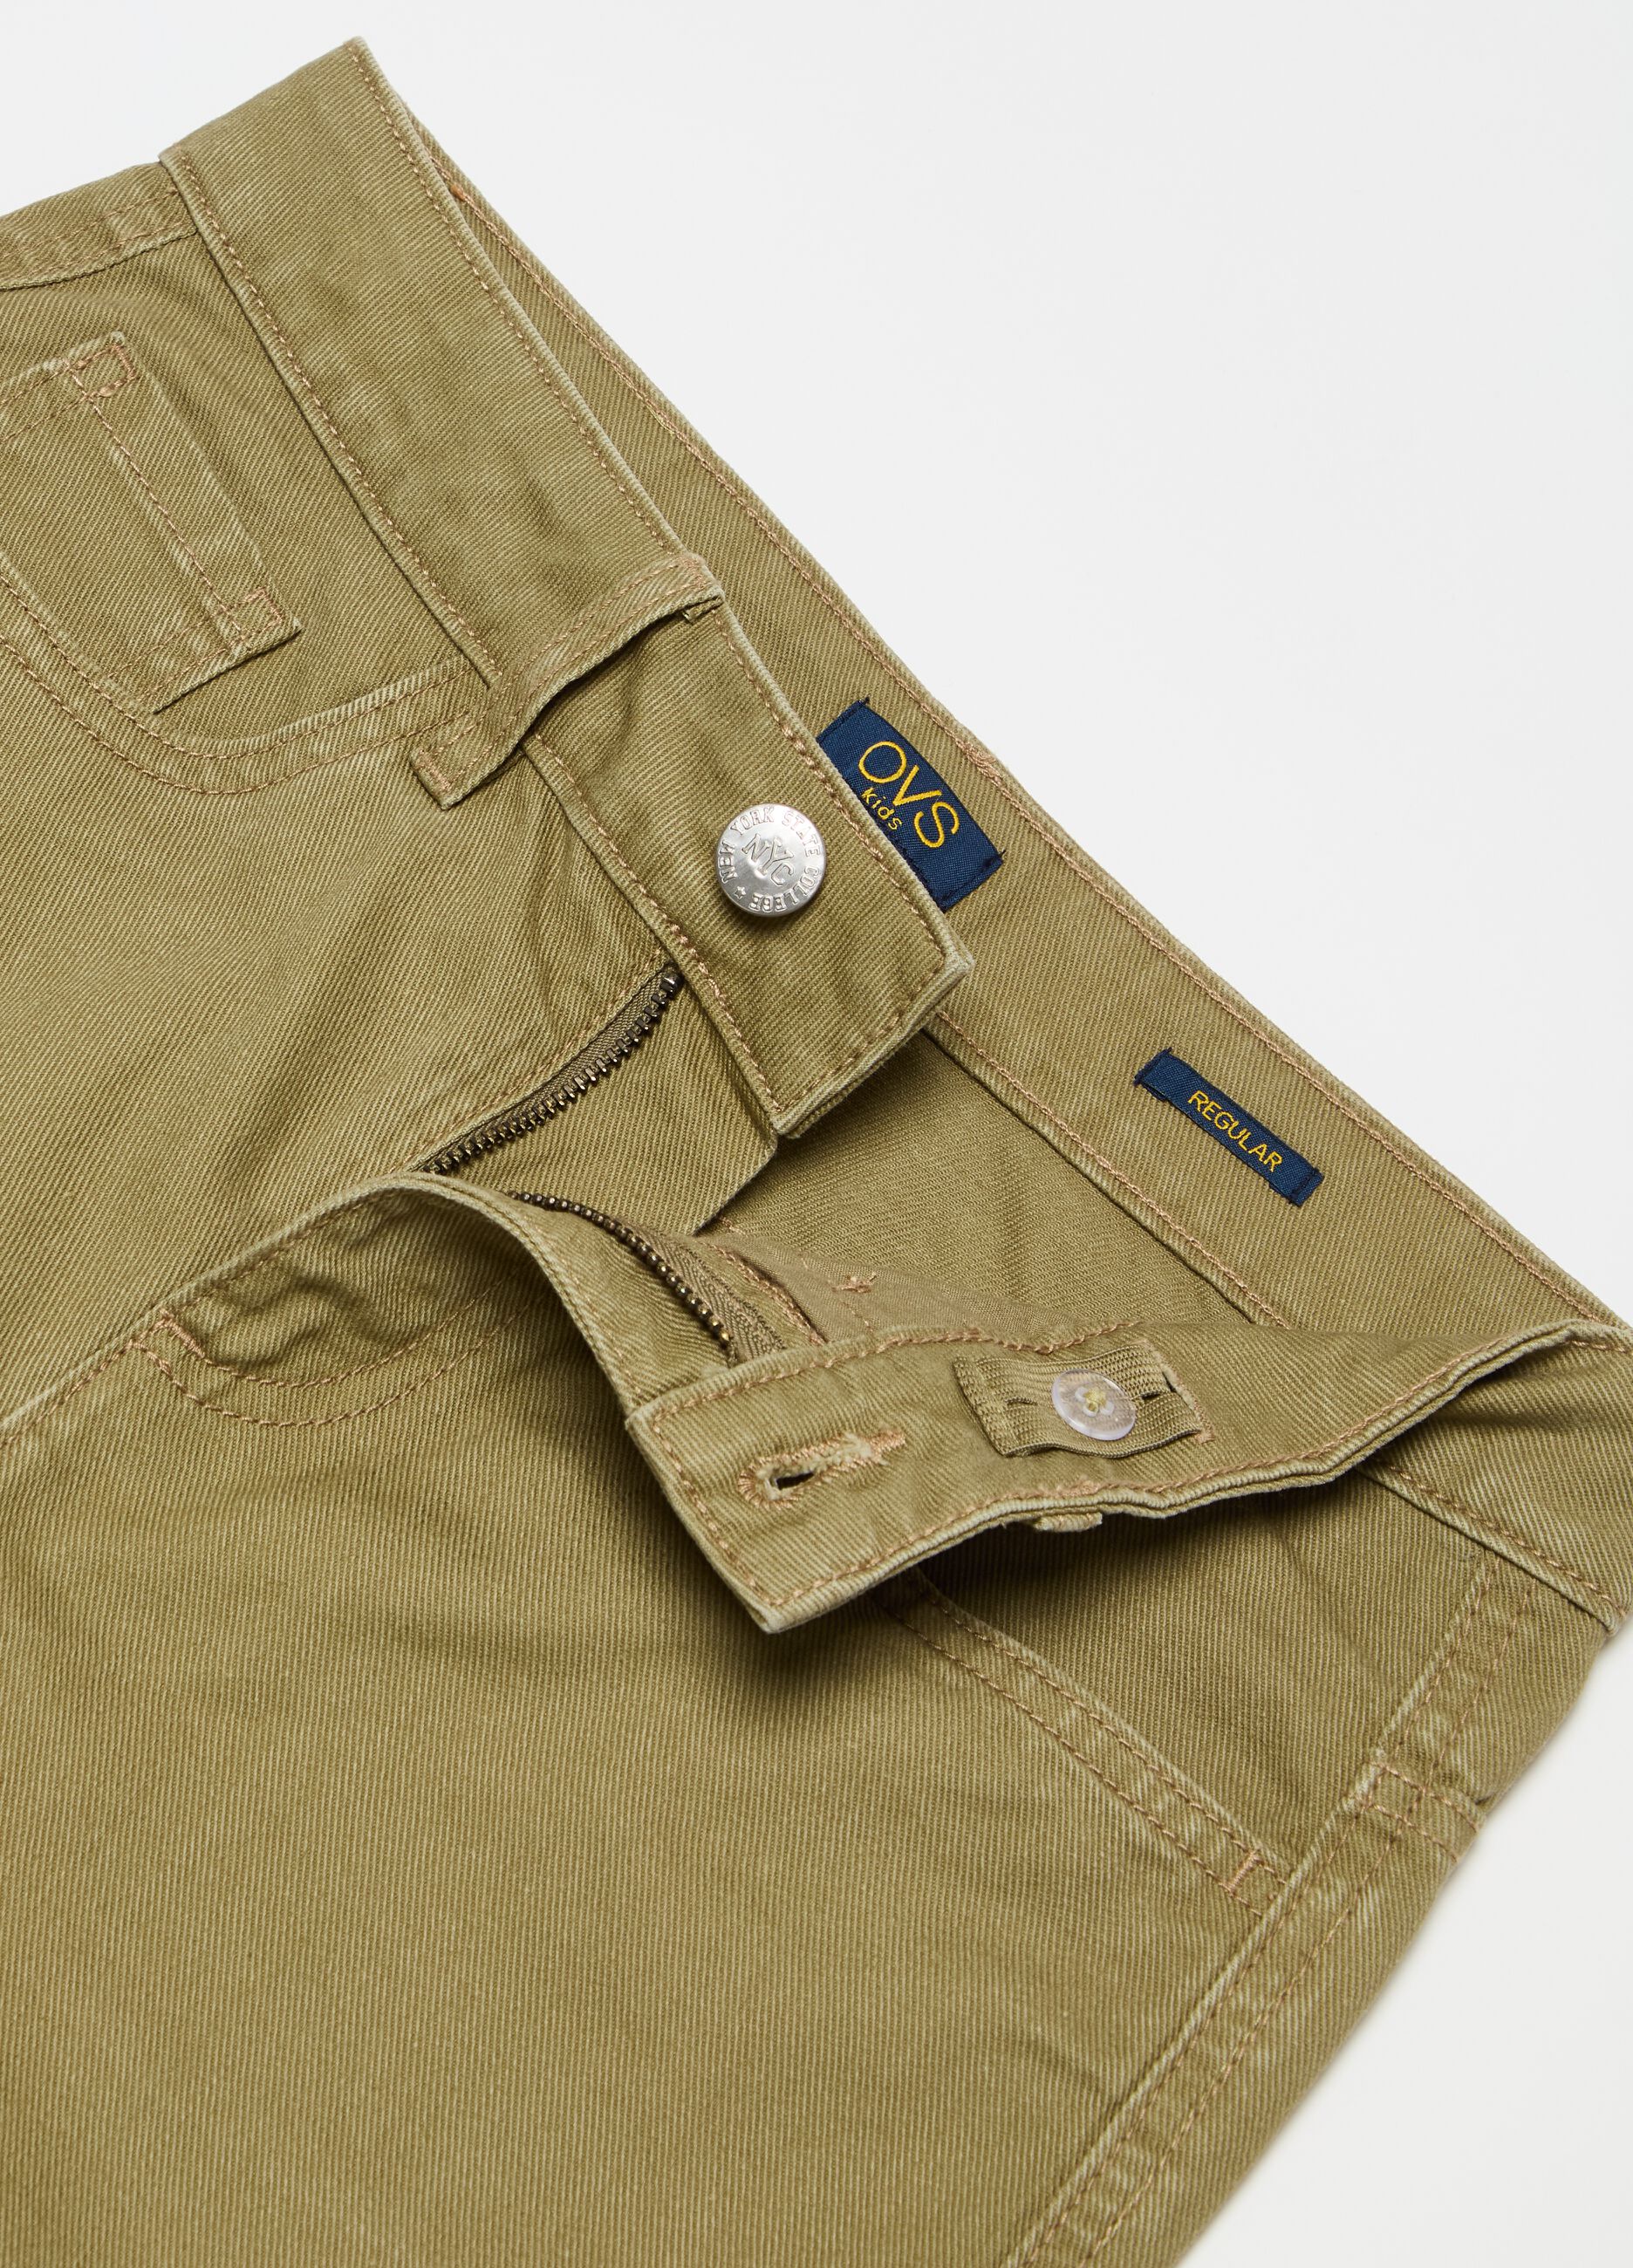 Cotton Bermuda shorts with five pockets